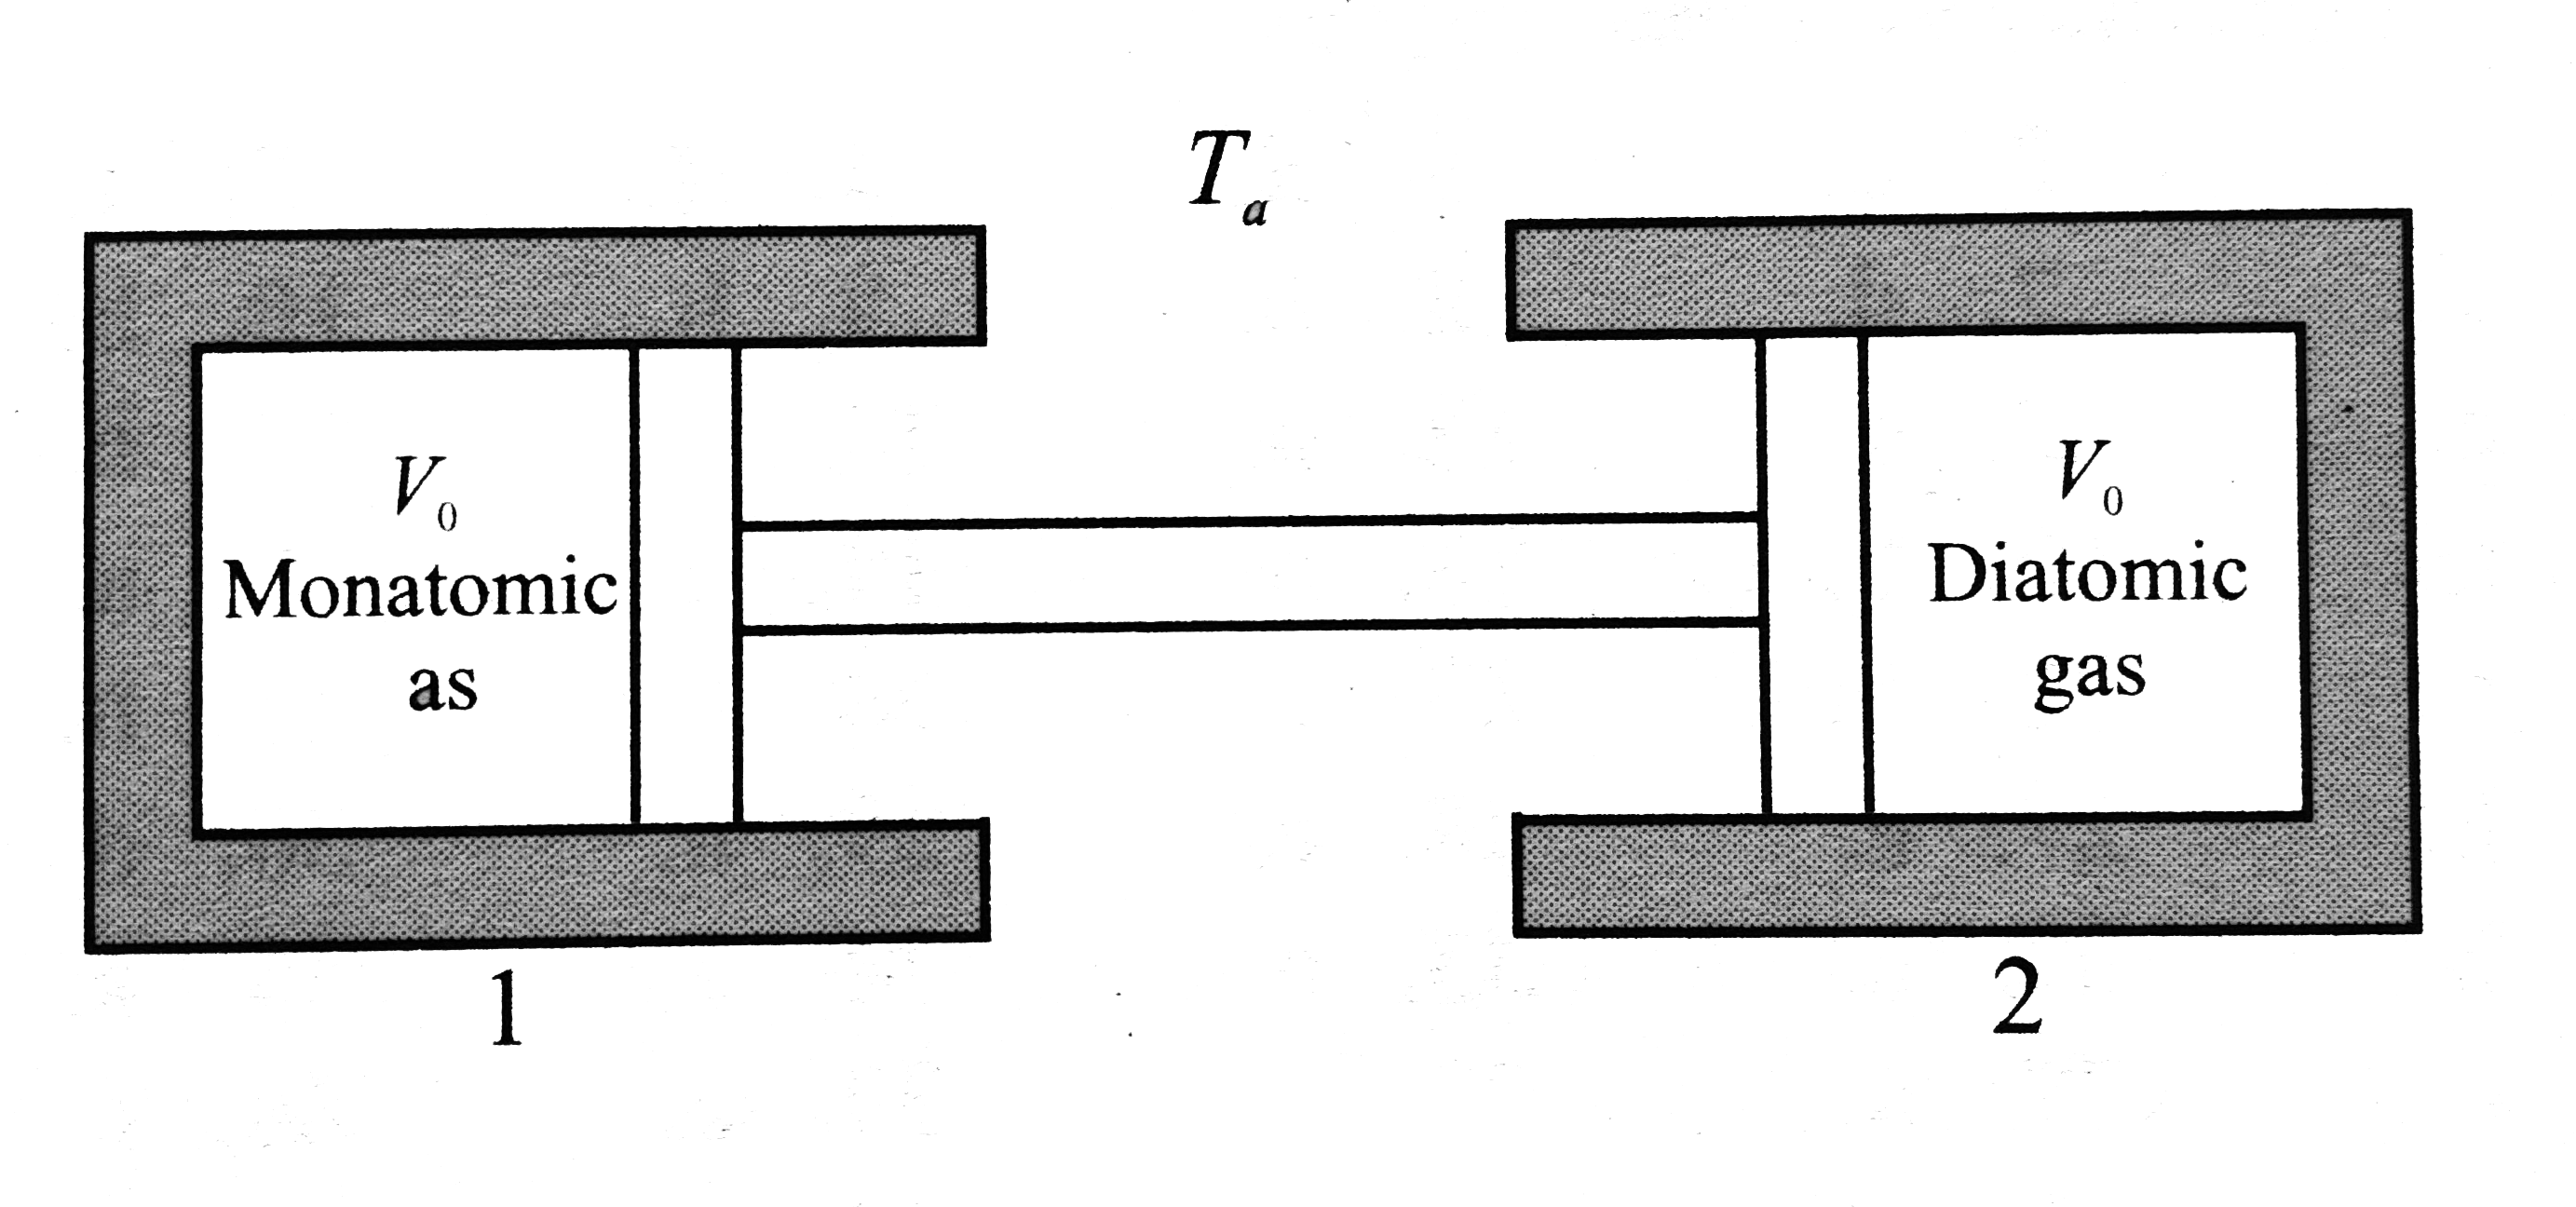 The two conducting cylinder-piston systems shows below are linked. Cylinder 1 is filled with a certain molar quantity of a monatomic ideal gas, and cylinder 2 is filled with an equal molar quantity of a diatomic ideal gas. The entire apparatus is situated inside an oven whose temperature is T(a) = 27^(@)C. The cylinder volumes have the same initial value V(0) = 100 cc. When the oven temperature is slowly raised to T(b) = 127^(@)C. What is the volume change Delta V (in cc) of cylinder 1 ?